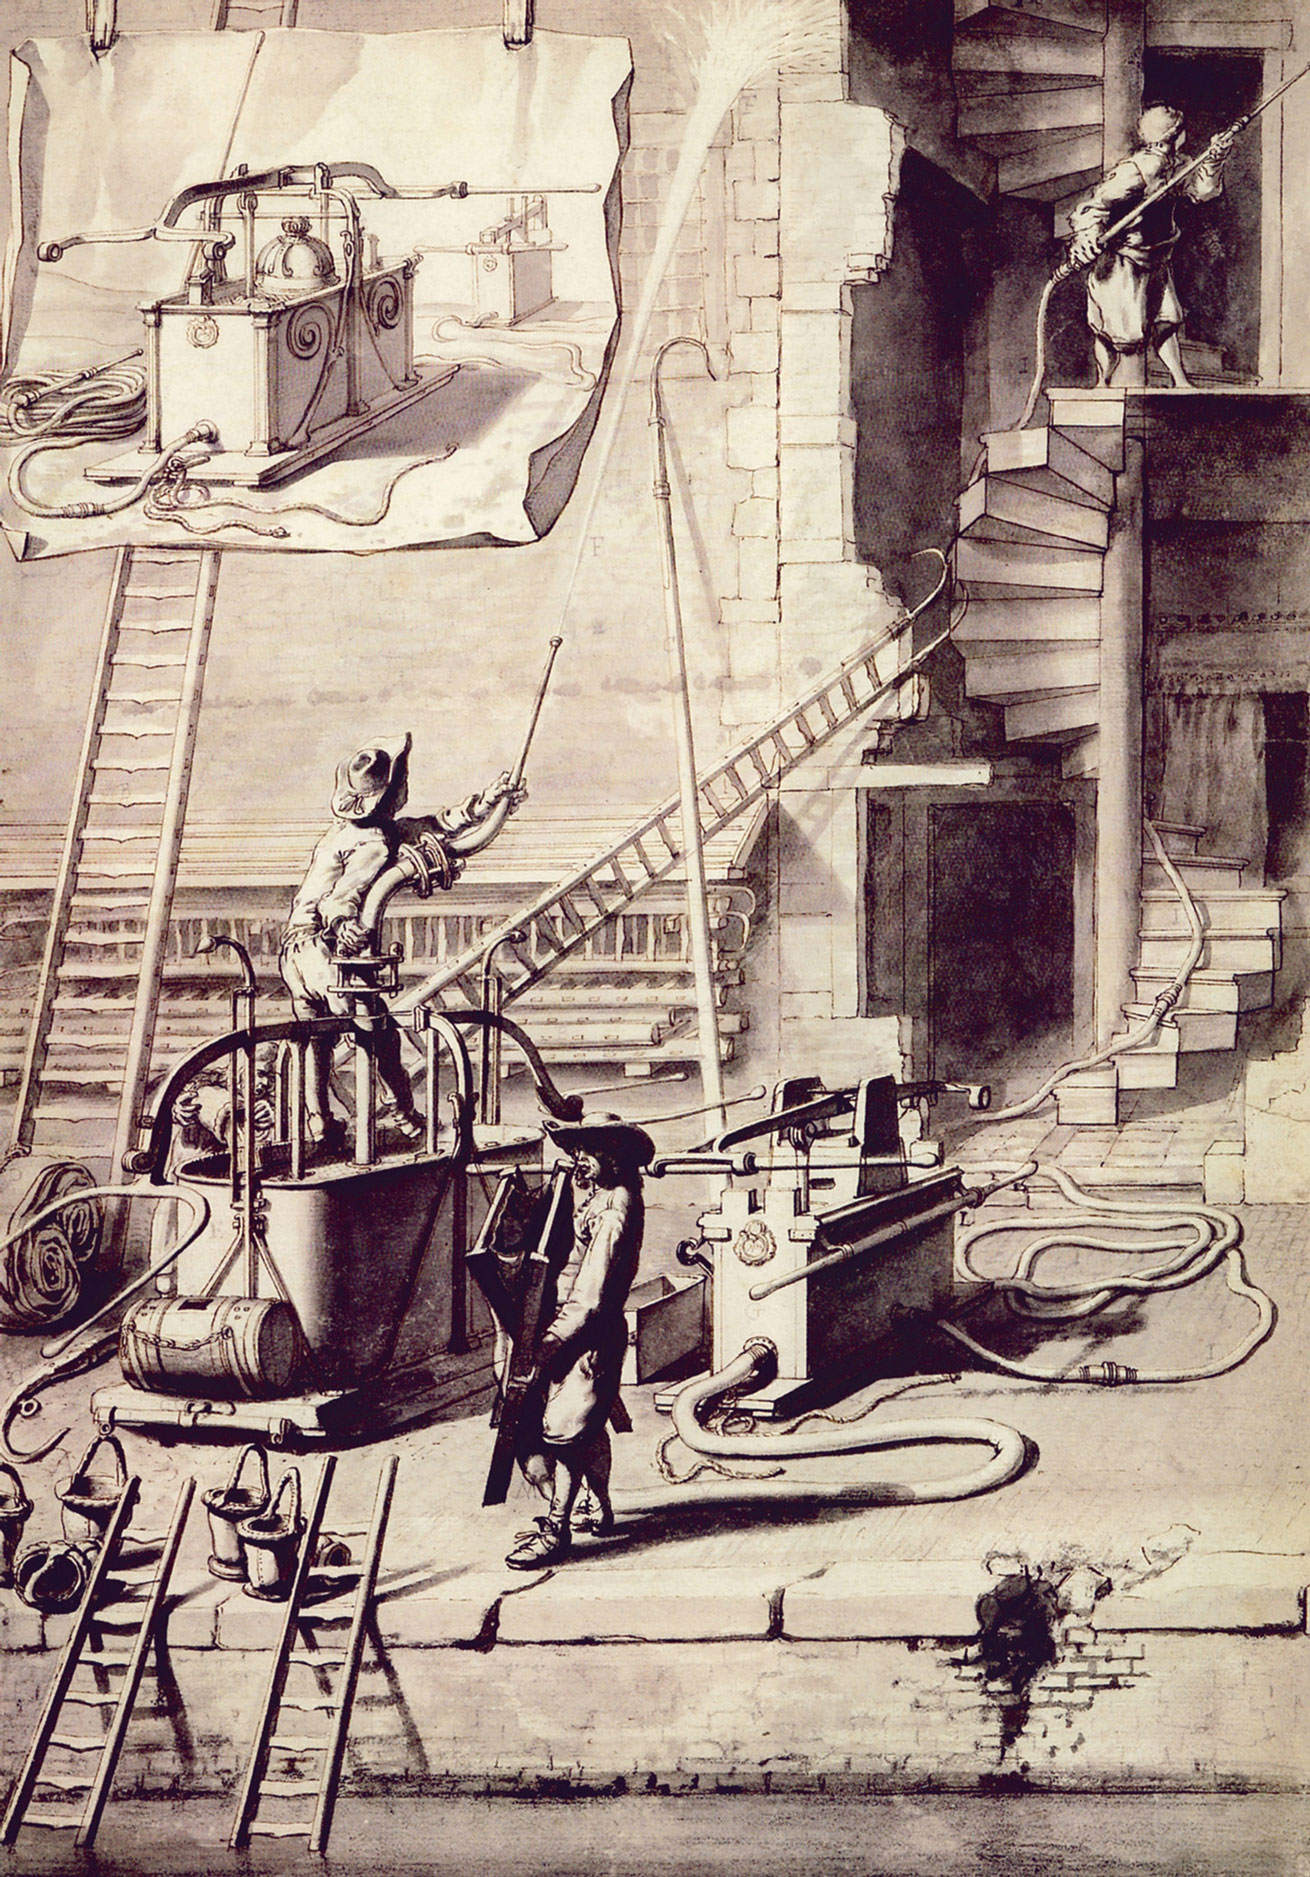 Jan van der Heyden, A Comparison of Old and New Firefighting Methods,
1680s. Van der Heyden uses the diagram to show the many advantages of
his new inventions—the pliable fire hose and a more efficient fire engine. On
the left, we see the old methods, dependent on drawing water in buckets
from a canal and filling the heavy, large fire engine whose fixed nozzle could
only move in a circle. On the right, we see the new, small fire engine, which
uses a trestle equipped with a pliable, treated canvas hose to draw water
from the canal, and then pumps the water through a thin leather firehose
that can be taken all the way into the building. This drawing served as the
model for the first illustration in van der Heyden’s book Beschryving der
nieuwlyks uitgevonden en geoctrojeerde Slang-Brand-Spuiten en Haare
Wyze van Brand-Blussen, better known as Brandspuitenboek (The Fire
Engine Book), and published in Amsterdam in 1690.